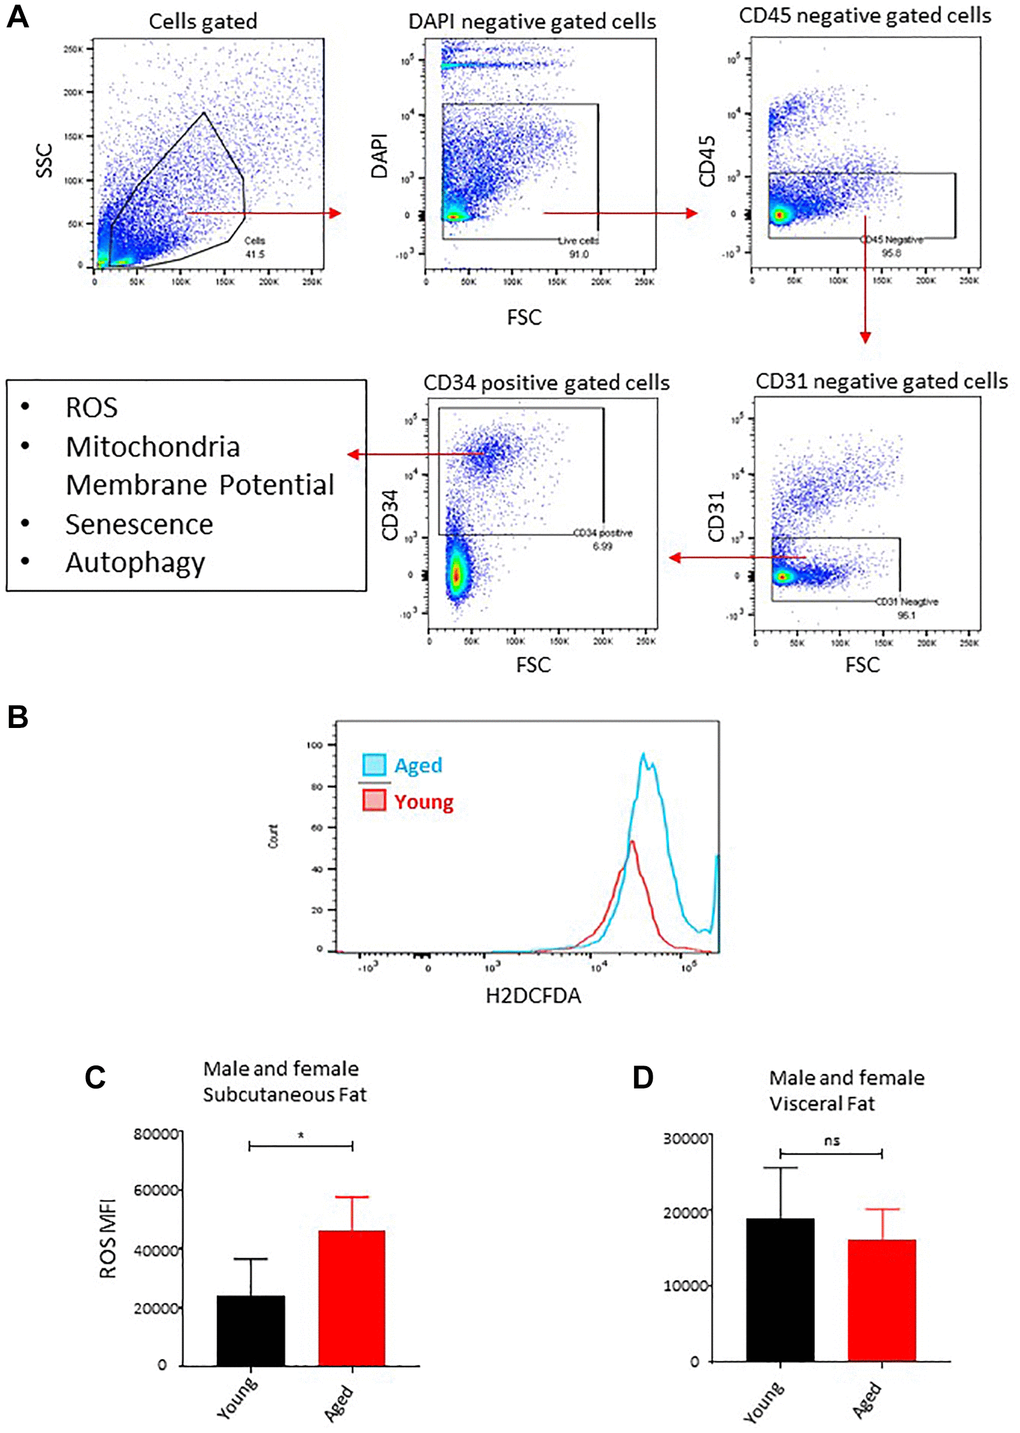 Age-associated oxidative stress in ASCs. (A) Flow cytometry gating strategy used in this study to gate on CD34+ fraction after excluding DAPI positive (dead cells), CD45+ (hematopoietic lineage), and CD31+ (endothelial) cells for downstream analysis of ROS, mitochondrial membrane potential, senescence, and autophagy markers. (B) ROS concentration was measured in ASCs. A representative histogram of flow cytometric measurement of DCFDA fluorescence in young and aged subcutaneous ASCs. (C, D) Subcutaneous ASCs (C) and visceral (D) were isolated, treated with DCFDA dye ex vivo, and analyzed by FACS. Graphs are representative of eight mice per group and ASCs from two mice were pooled together to achieve 5000 events count. (n = 2 male and 2 female mice per group) P value *, ns = non-significant.